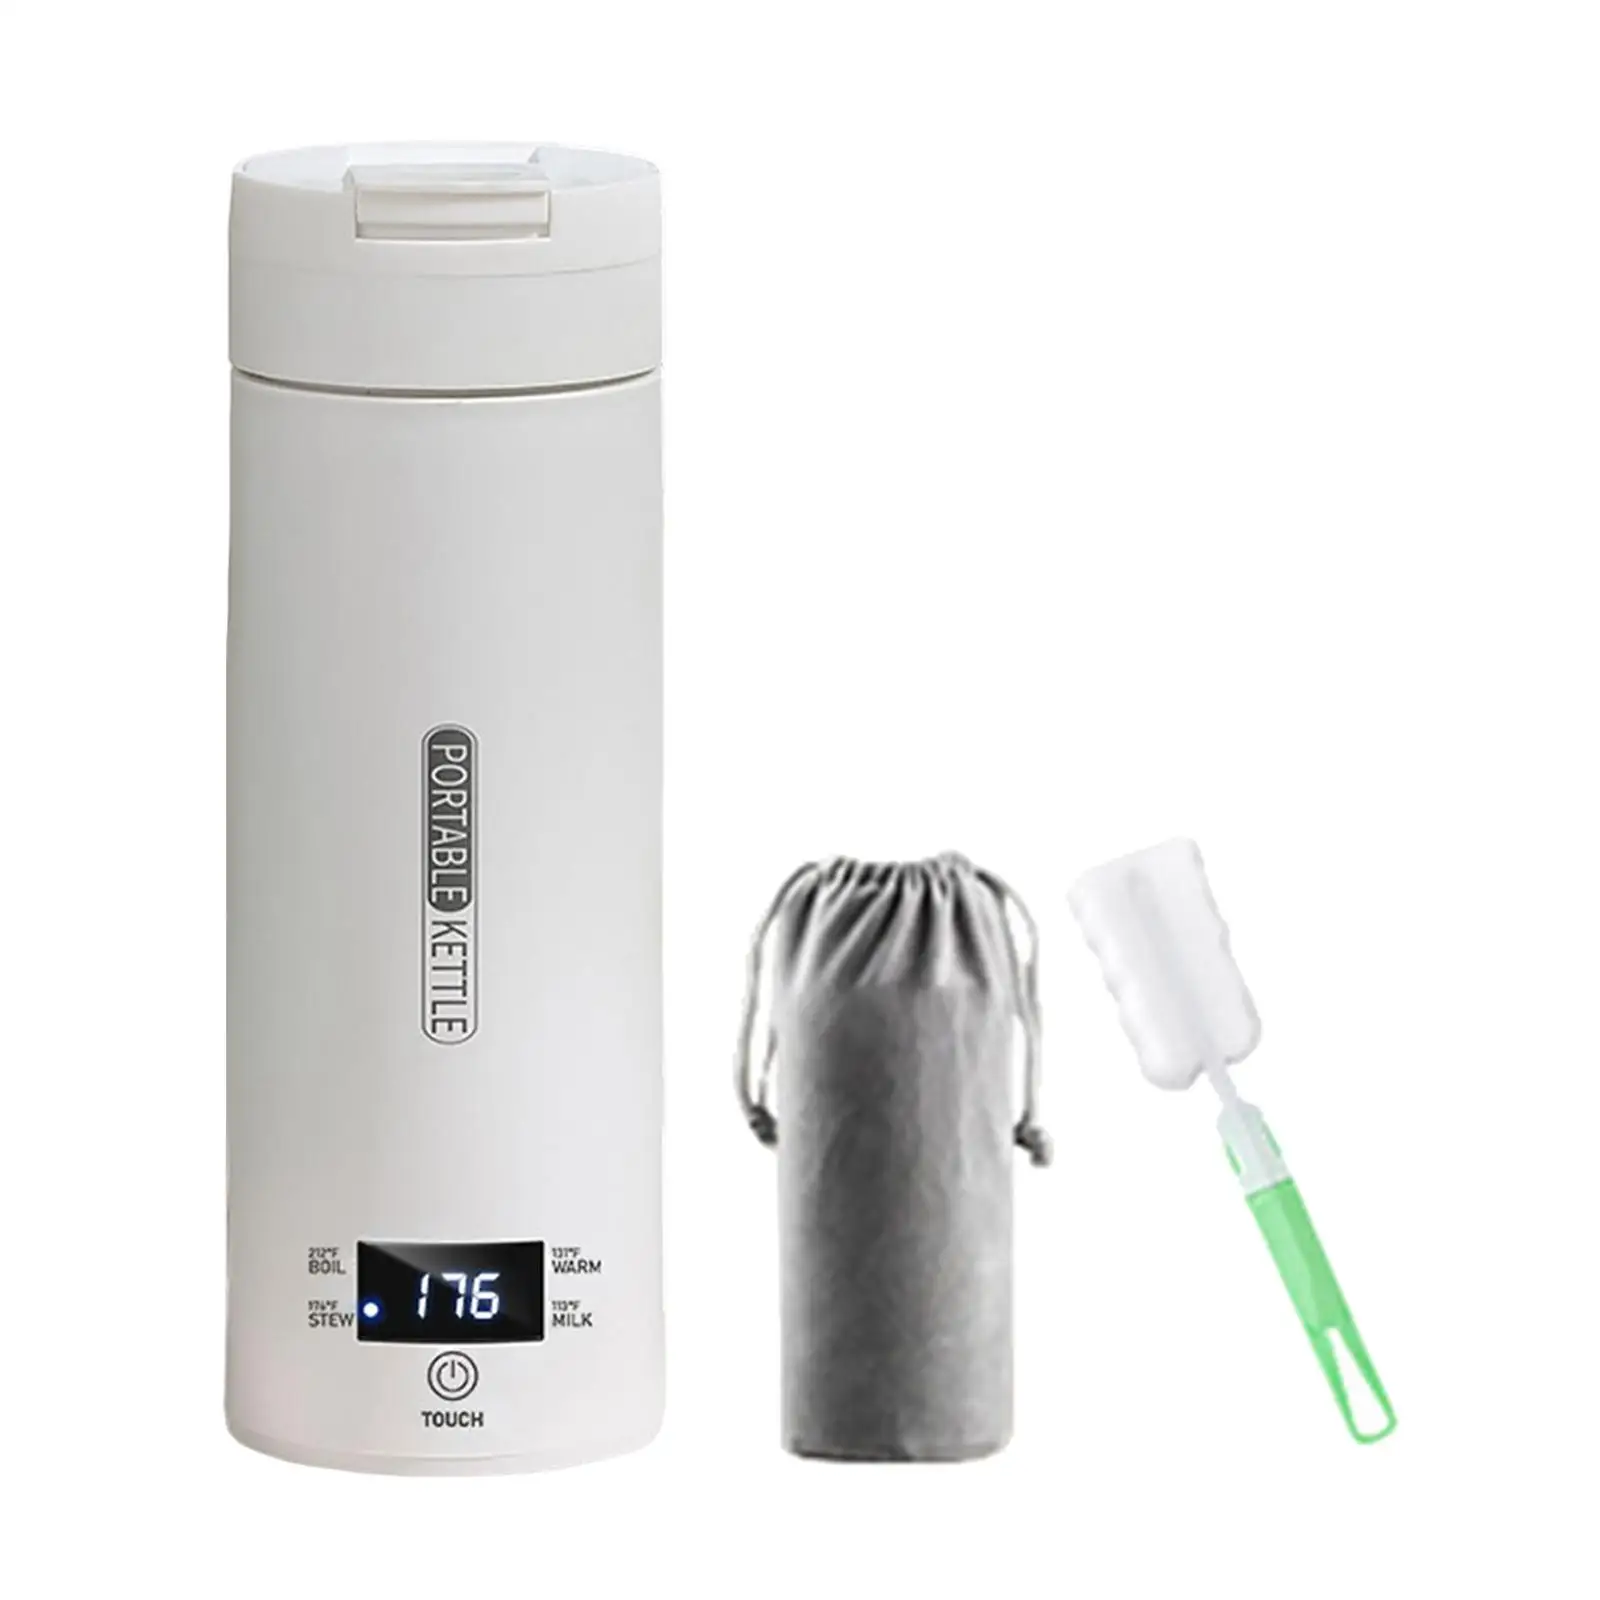 Intelligent Electric Tea Kettle with Cleaning Brush and Sleeve Lightweight for Boiling Bottle for Drivers